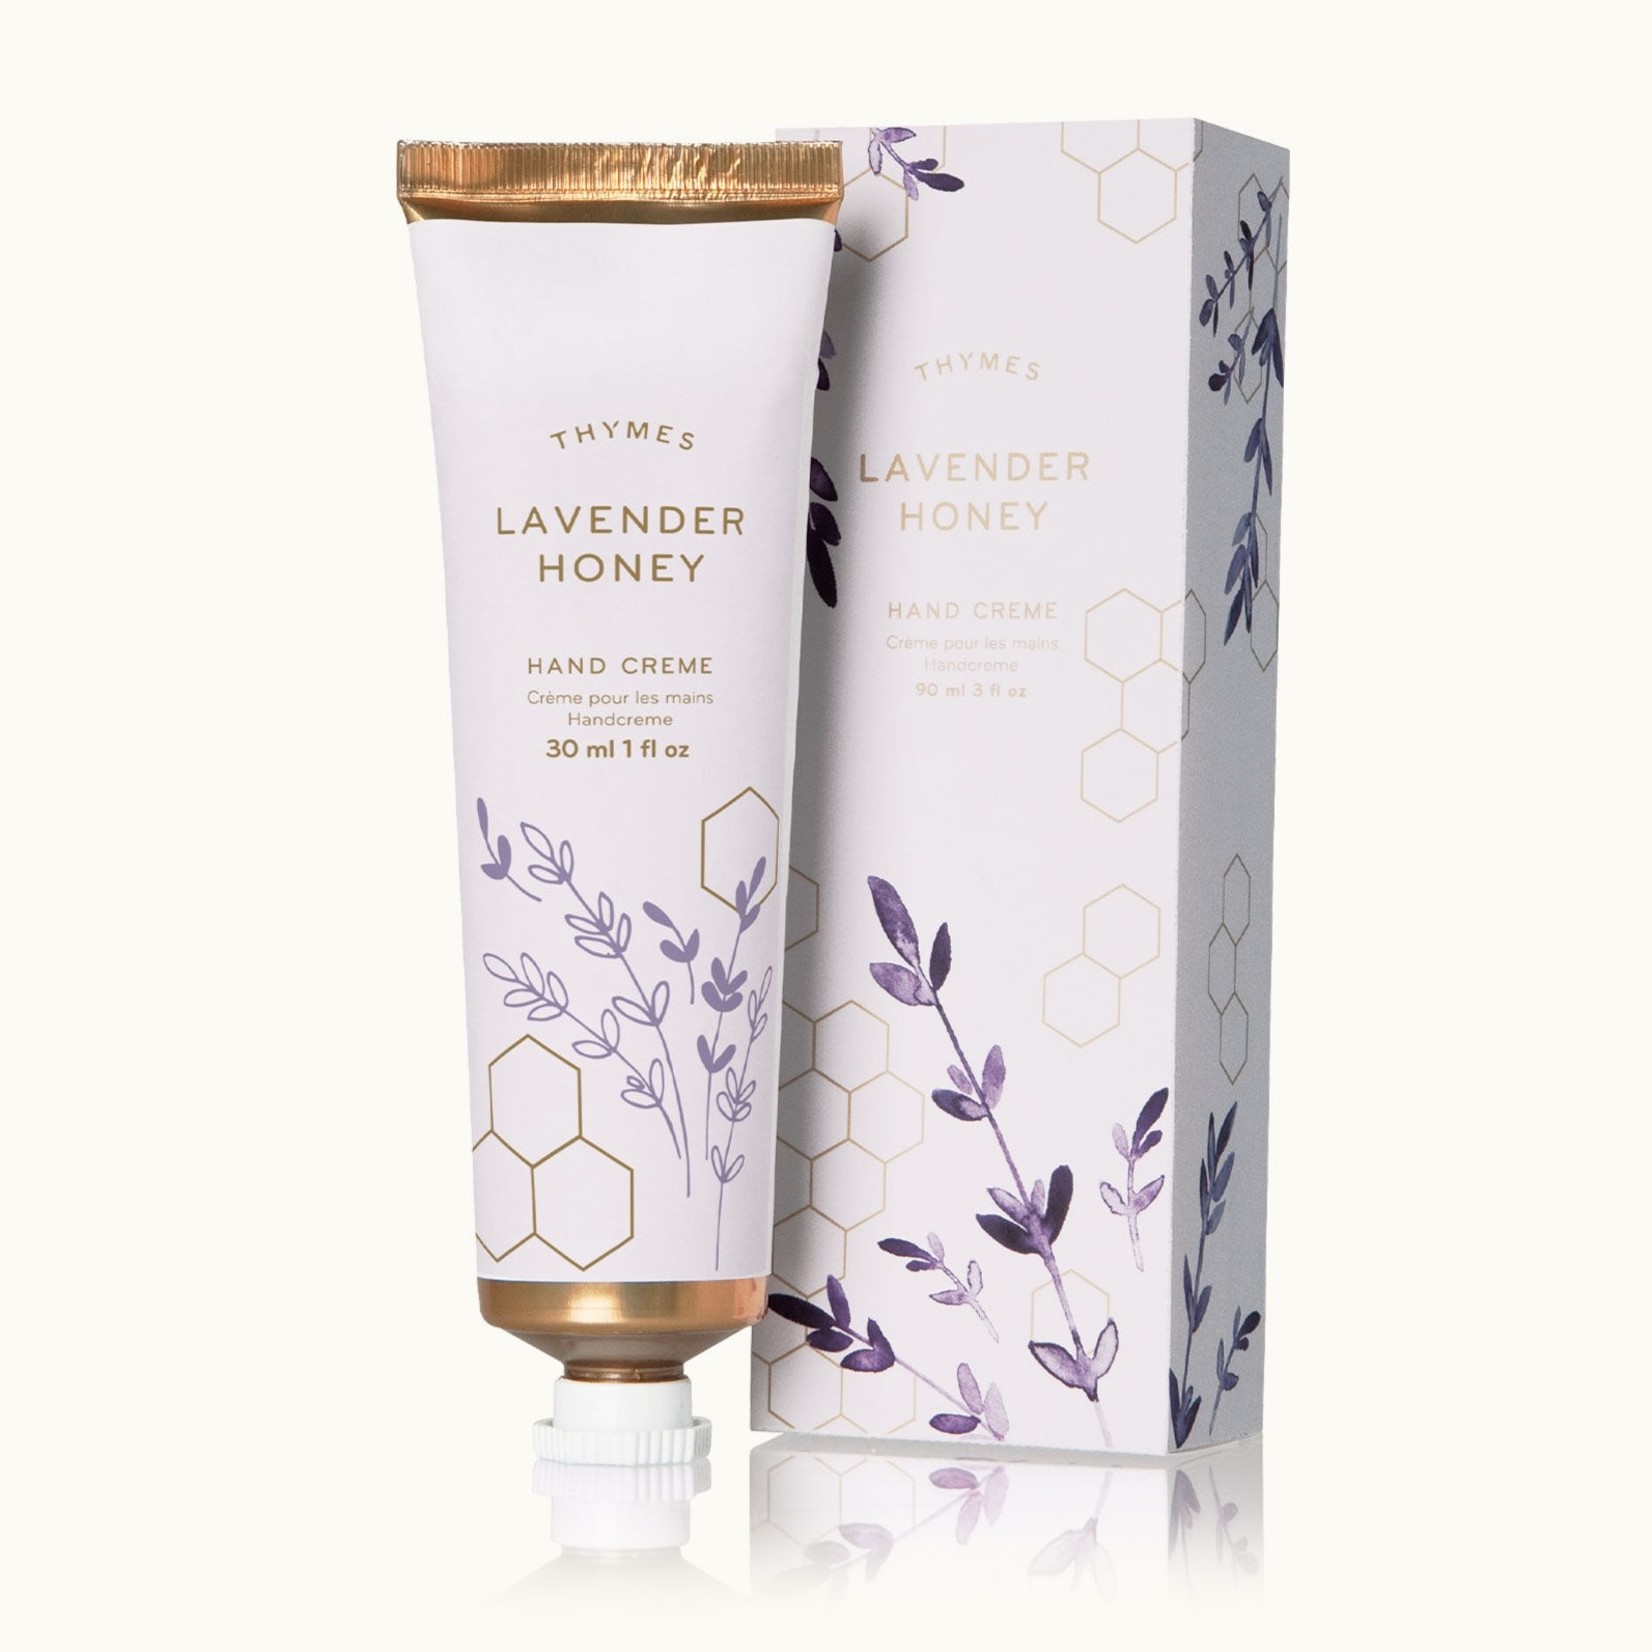 Thymes Thymes Hand Creme